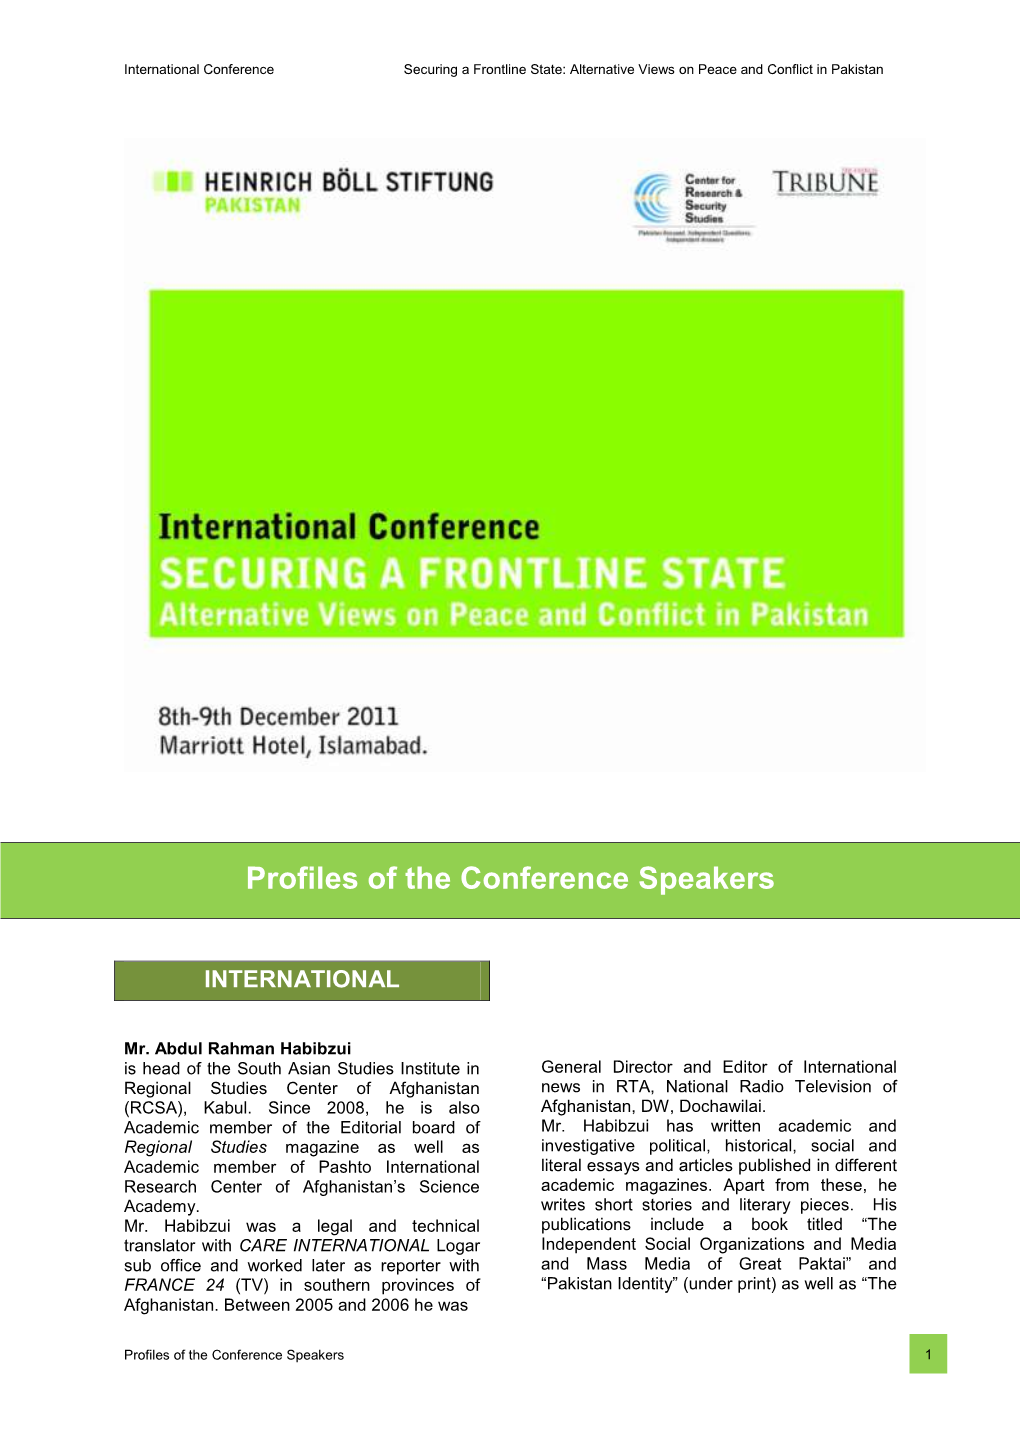 Profiles of the Conference Speakers